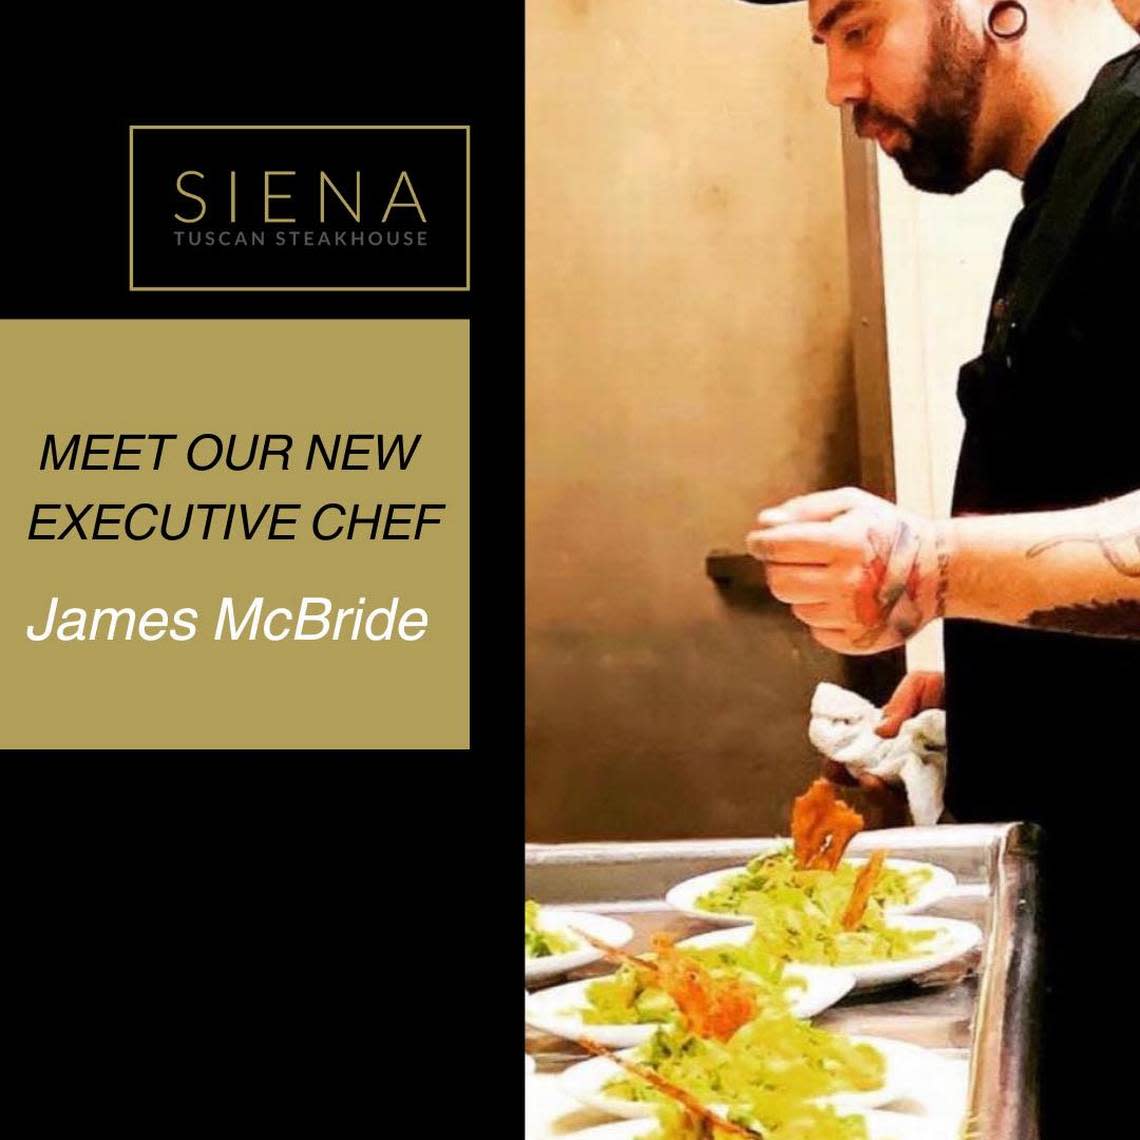 Siena Tuscan Steakhouse shared the news of Chef James McBride’s hiring in August.